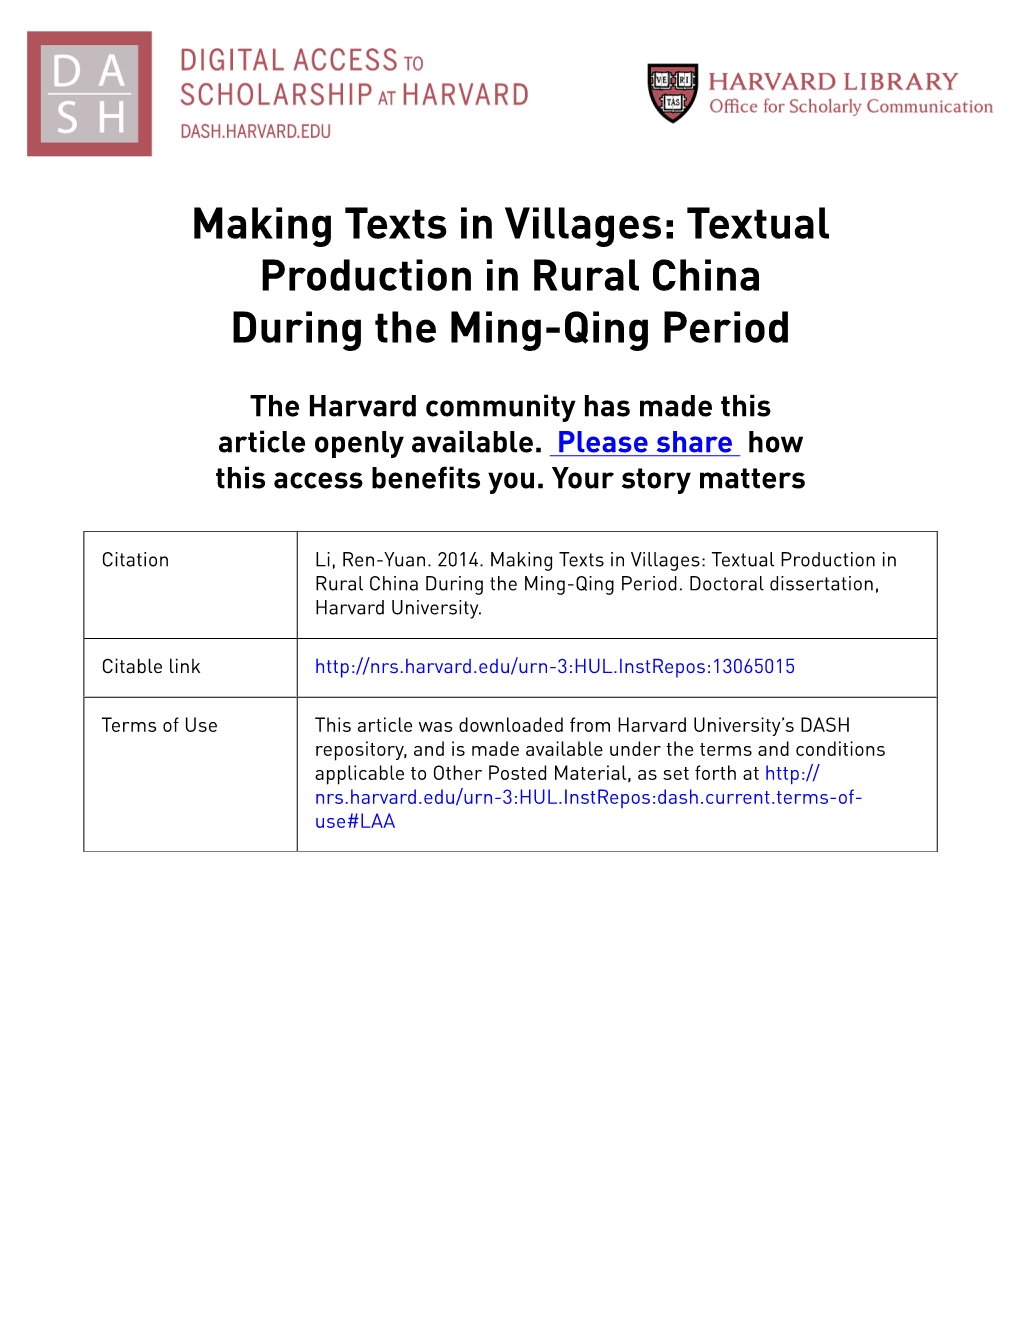 Textual Production in Rural China During the Ming-Qing Period